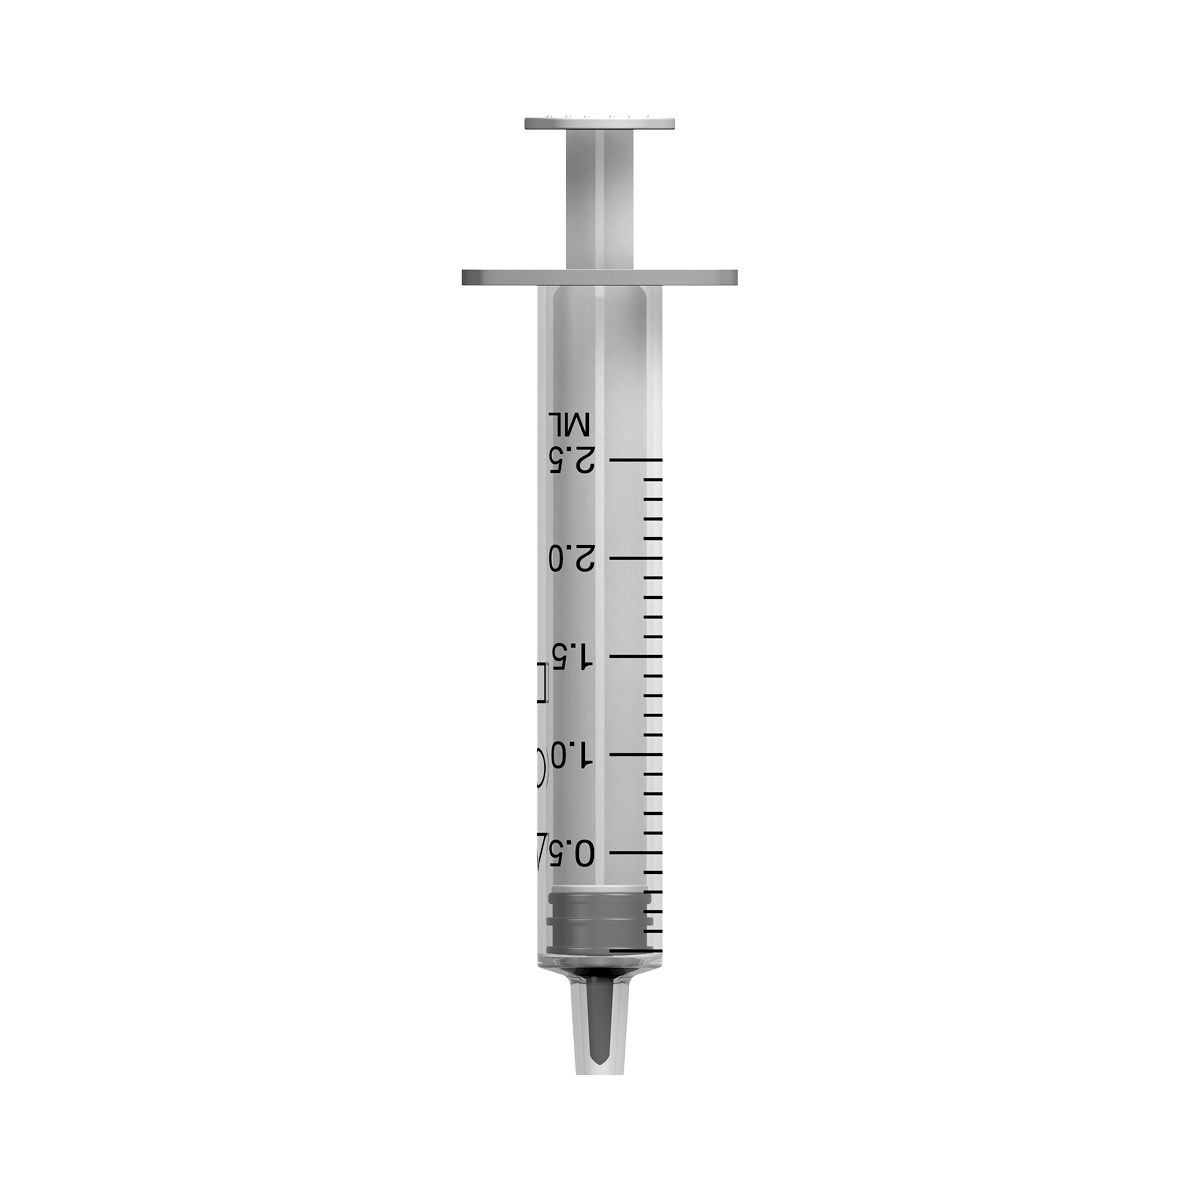 2ml Reduced Dead Space Syringe (Temp Out Of Stock)